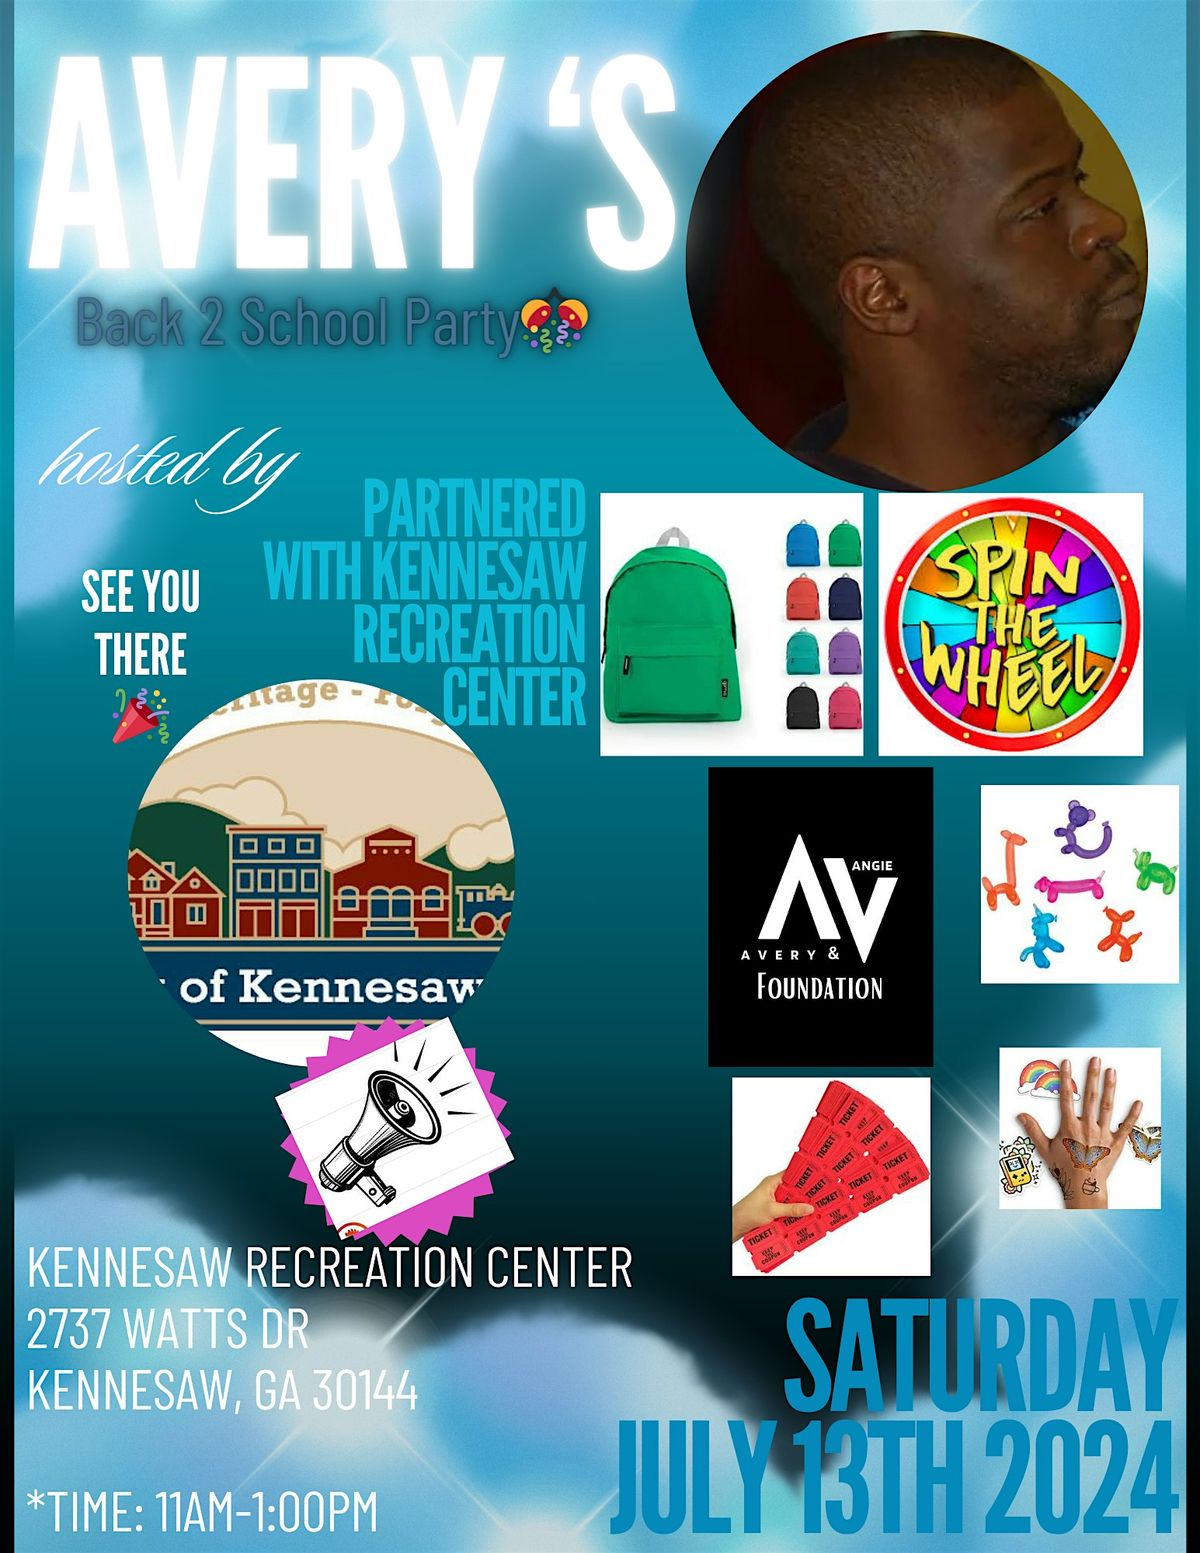 AVERY\u2019S 2nd ANNUAL BACK 2 SCHOOL PARTY